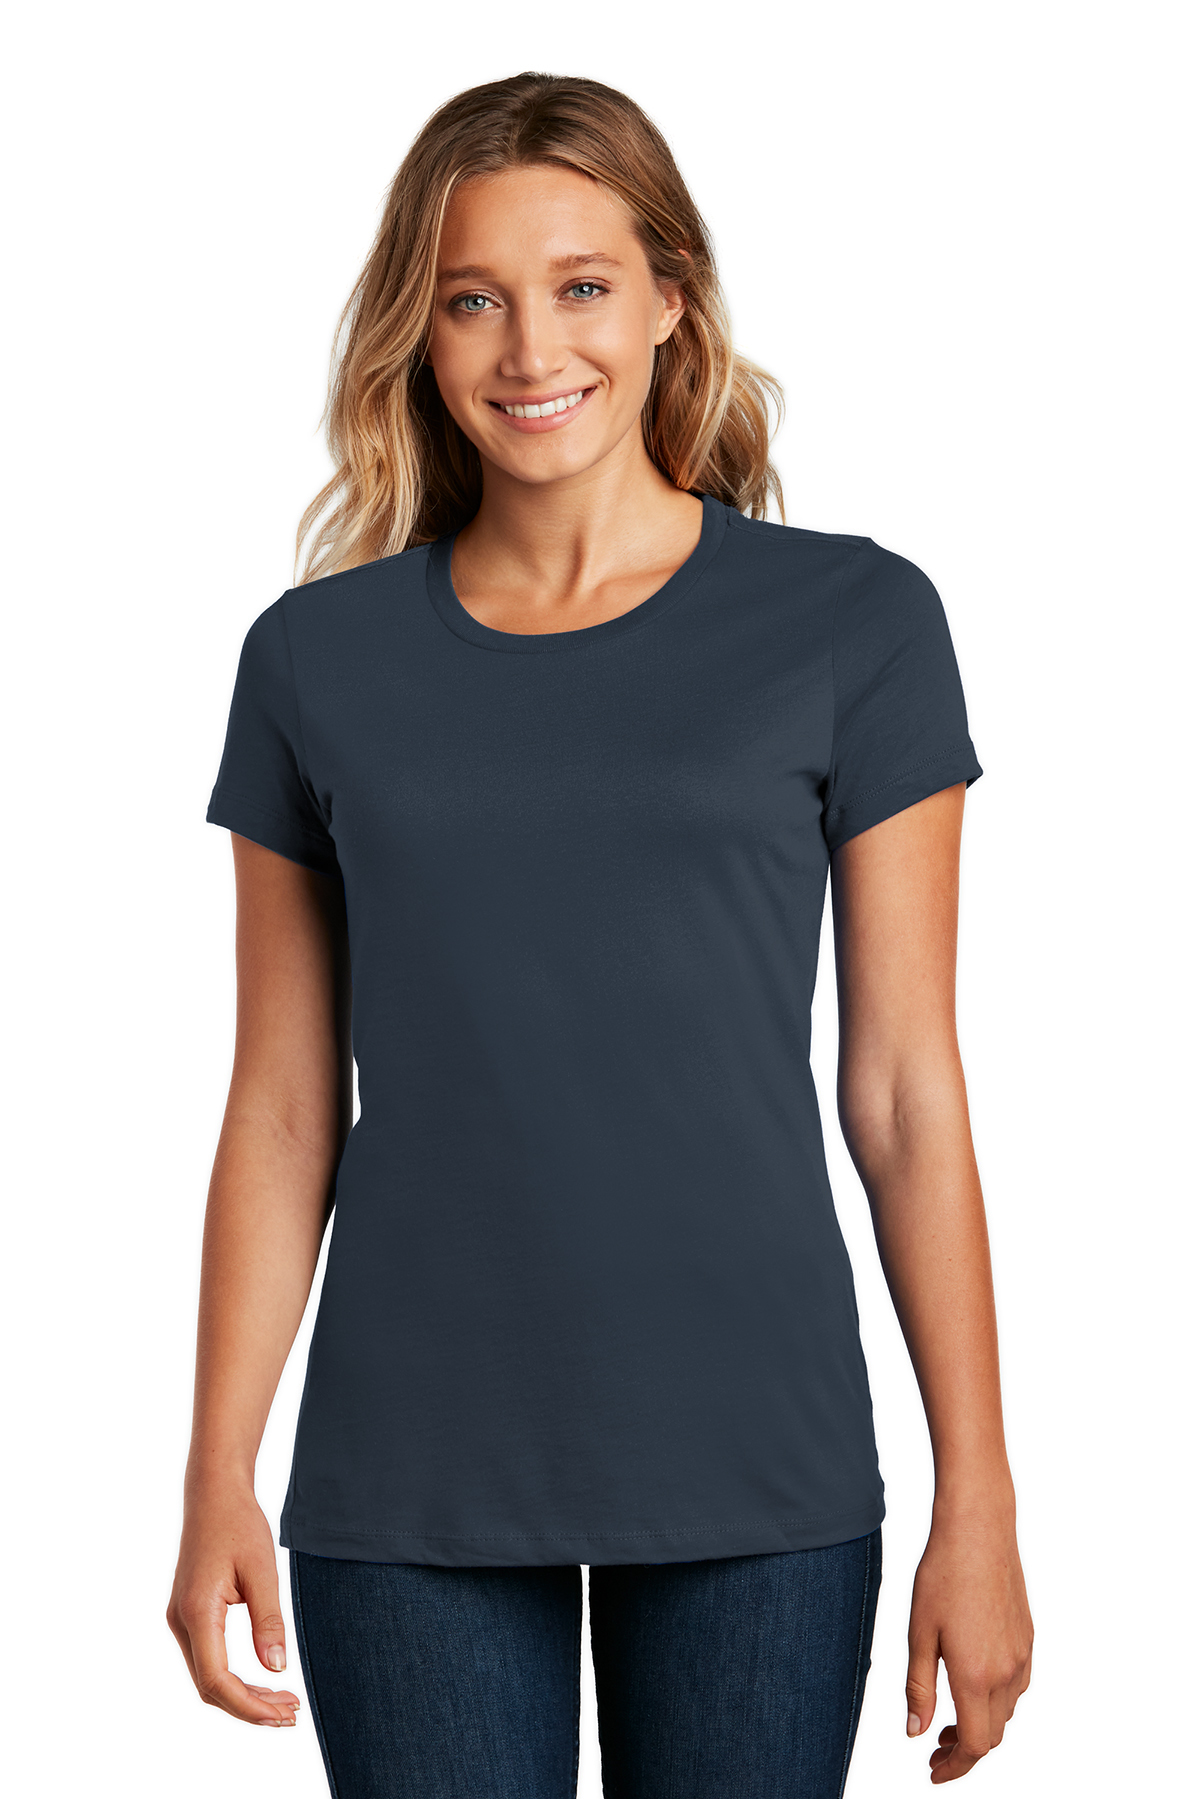 District Women’s Perfect Weight Tee | Product | Company Casuals